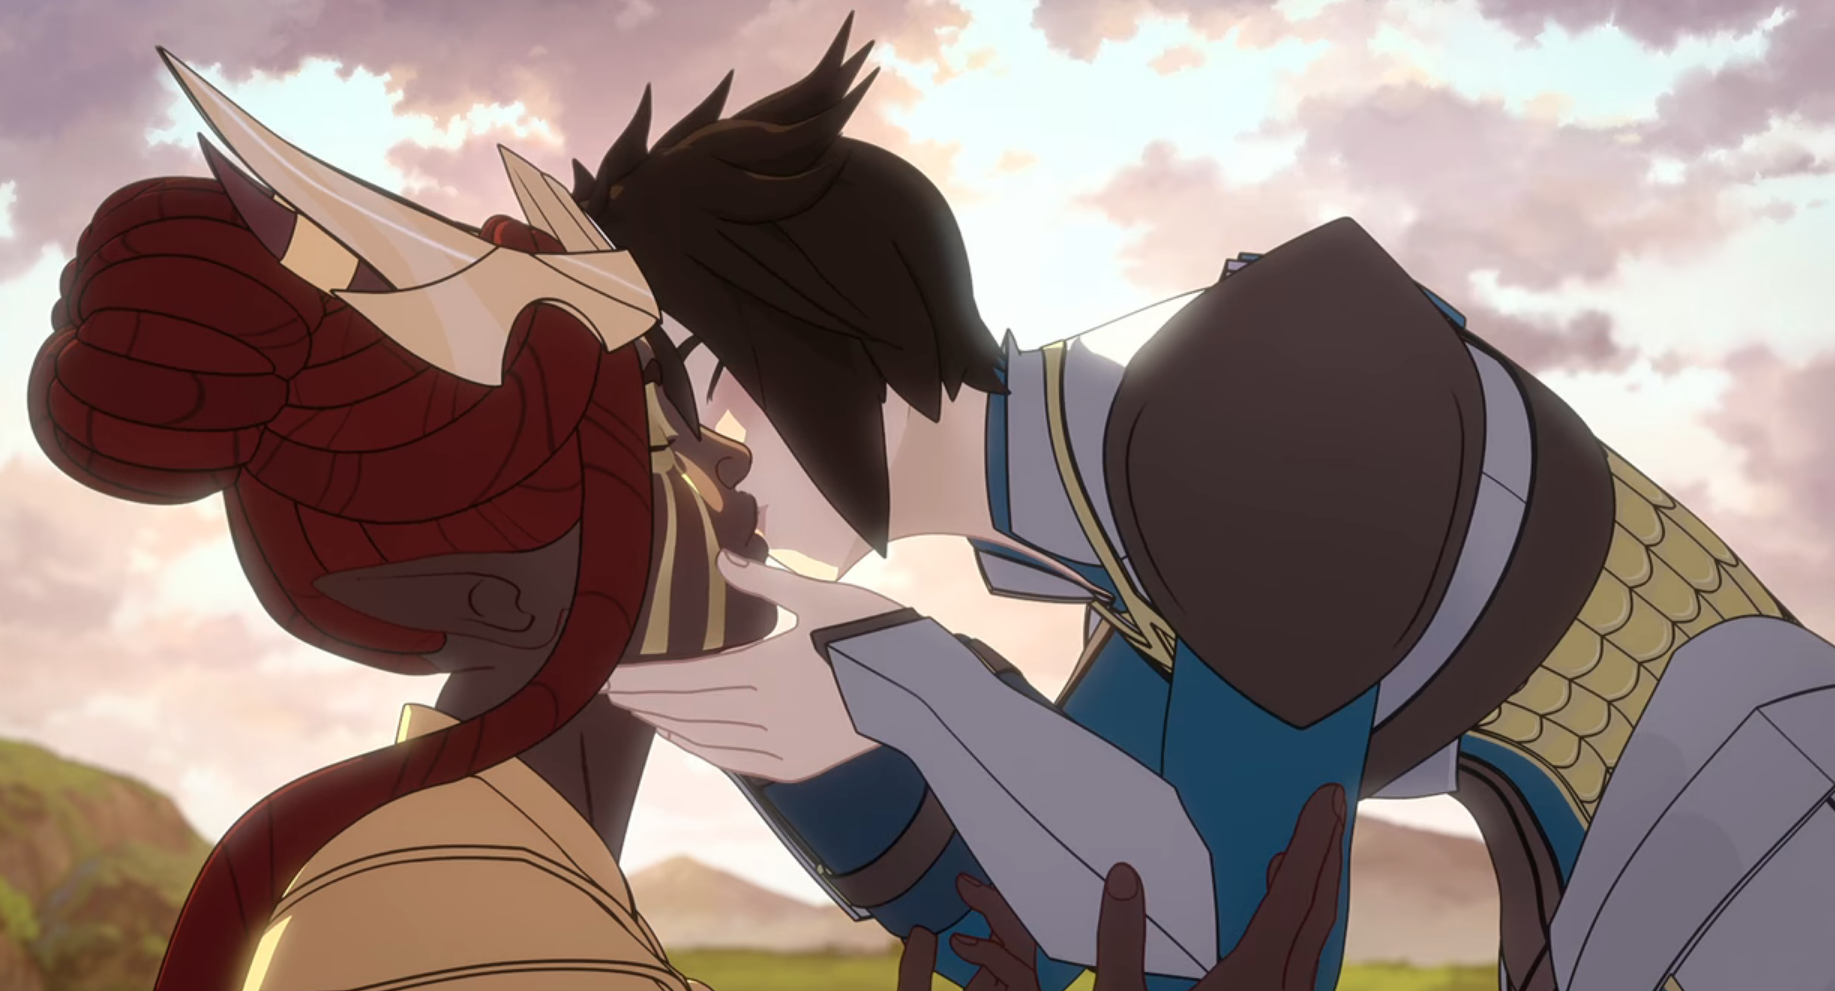 amaya, a strong woman wearing armor and sporting short, asymmetrical hair, leans down to kiss her fiance, Janai, an elf with brown skin and red braided hair